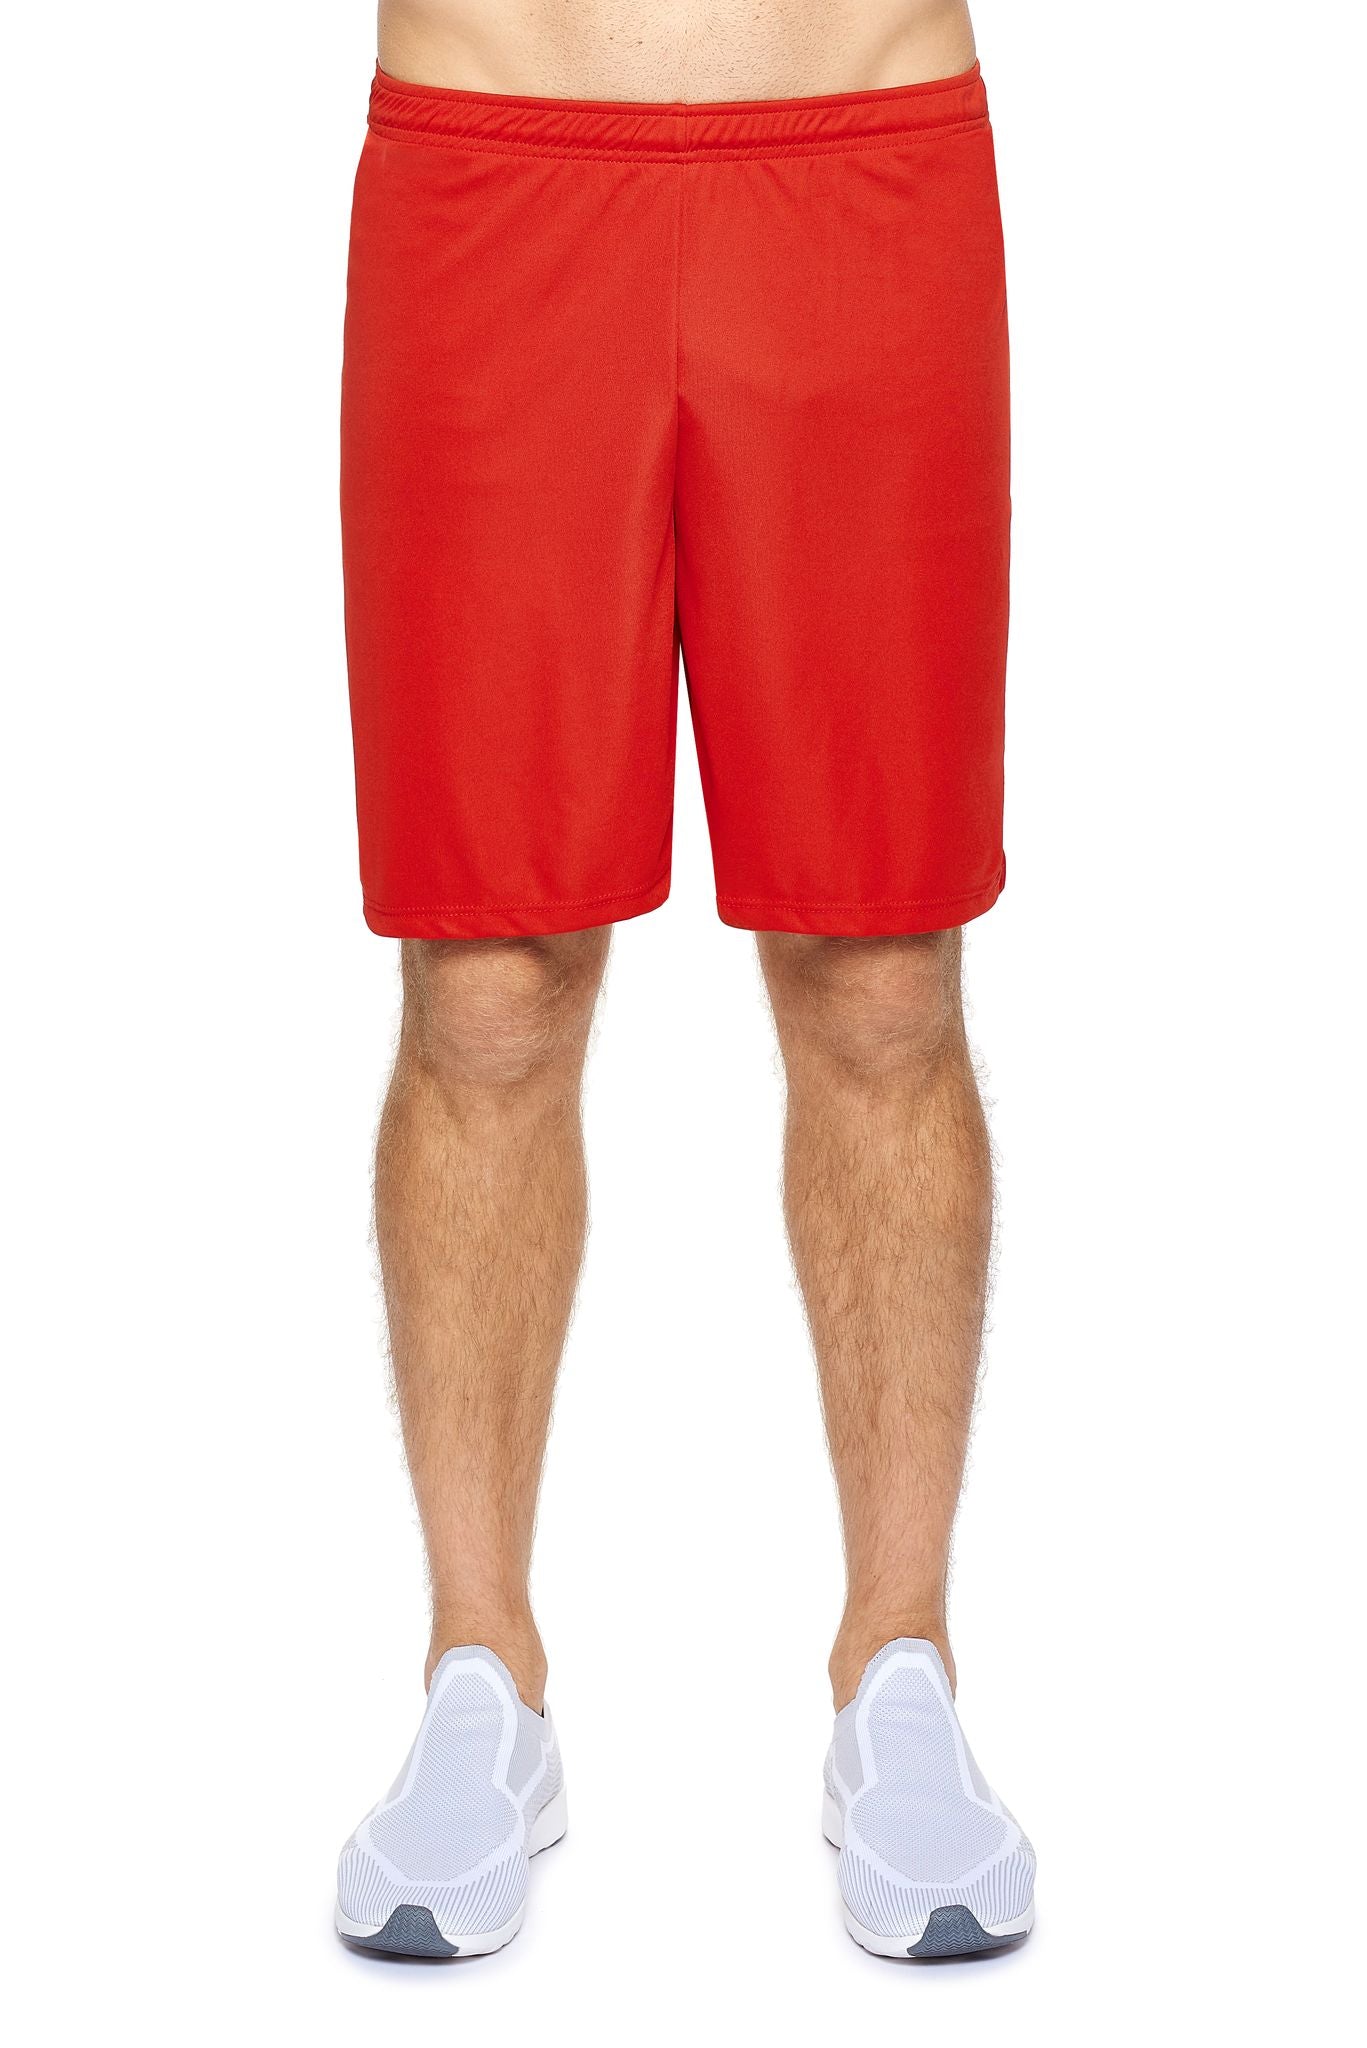 DriMax™ Impact Shorts 🇺🇸 - Expert Brand Apparel#color_true-red